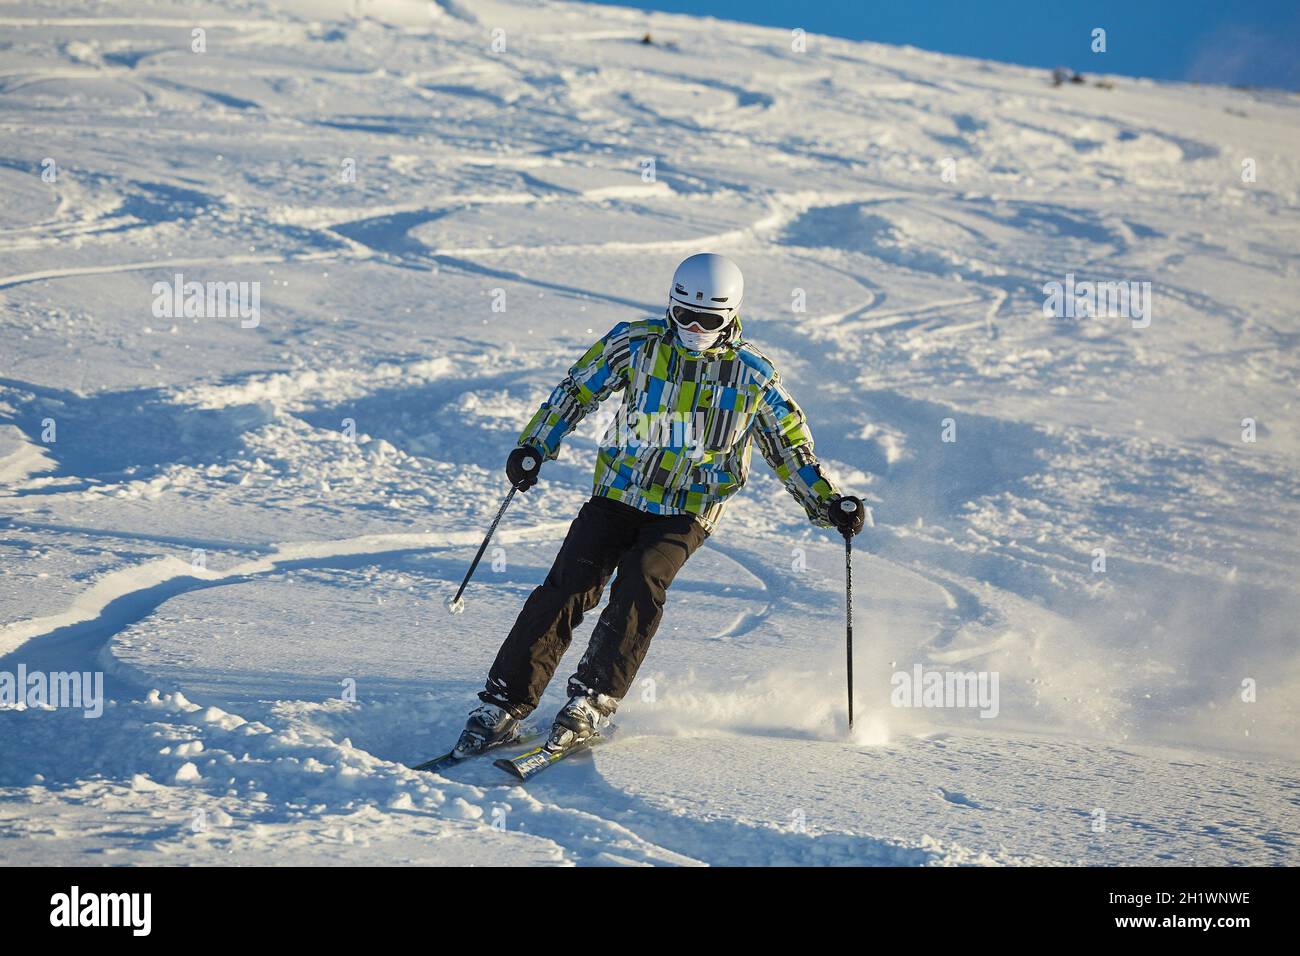 LES ORRES, FRANCE - JANUARY 23, 2015: Young skier coming down fast in fresh powder snow off-piste. Stock Photo